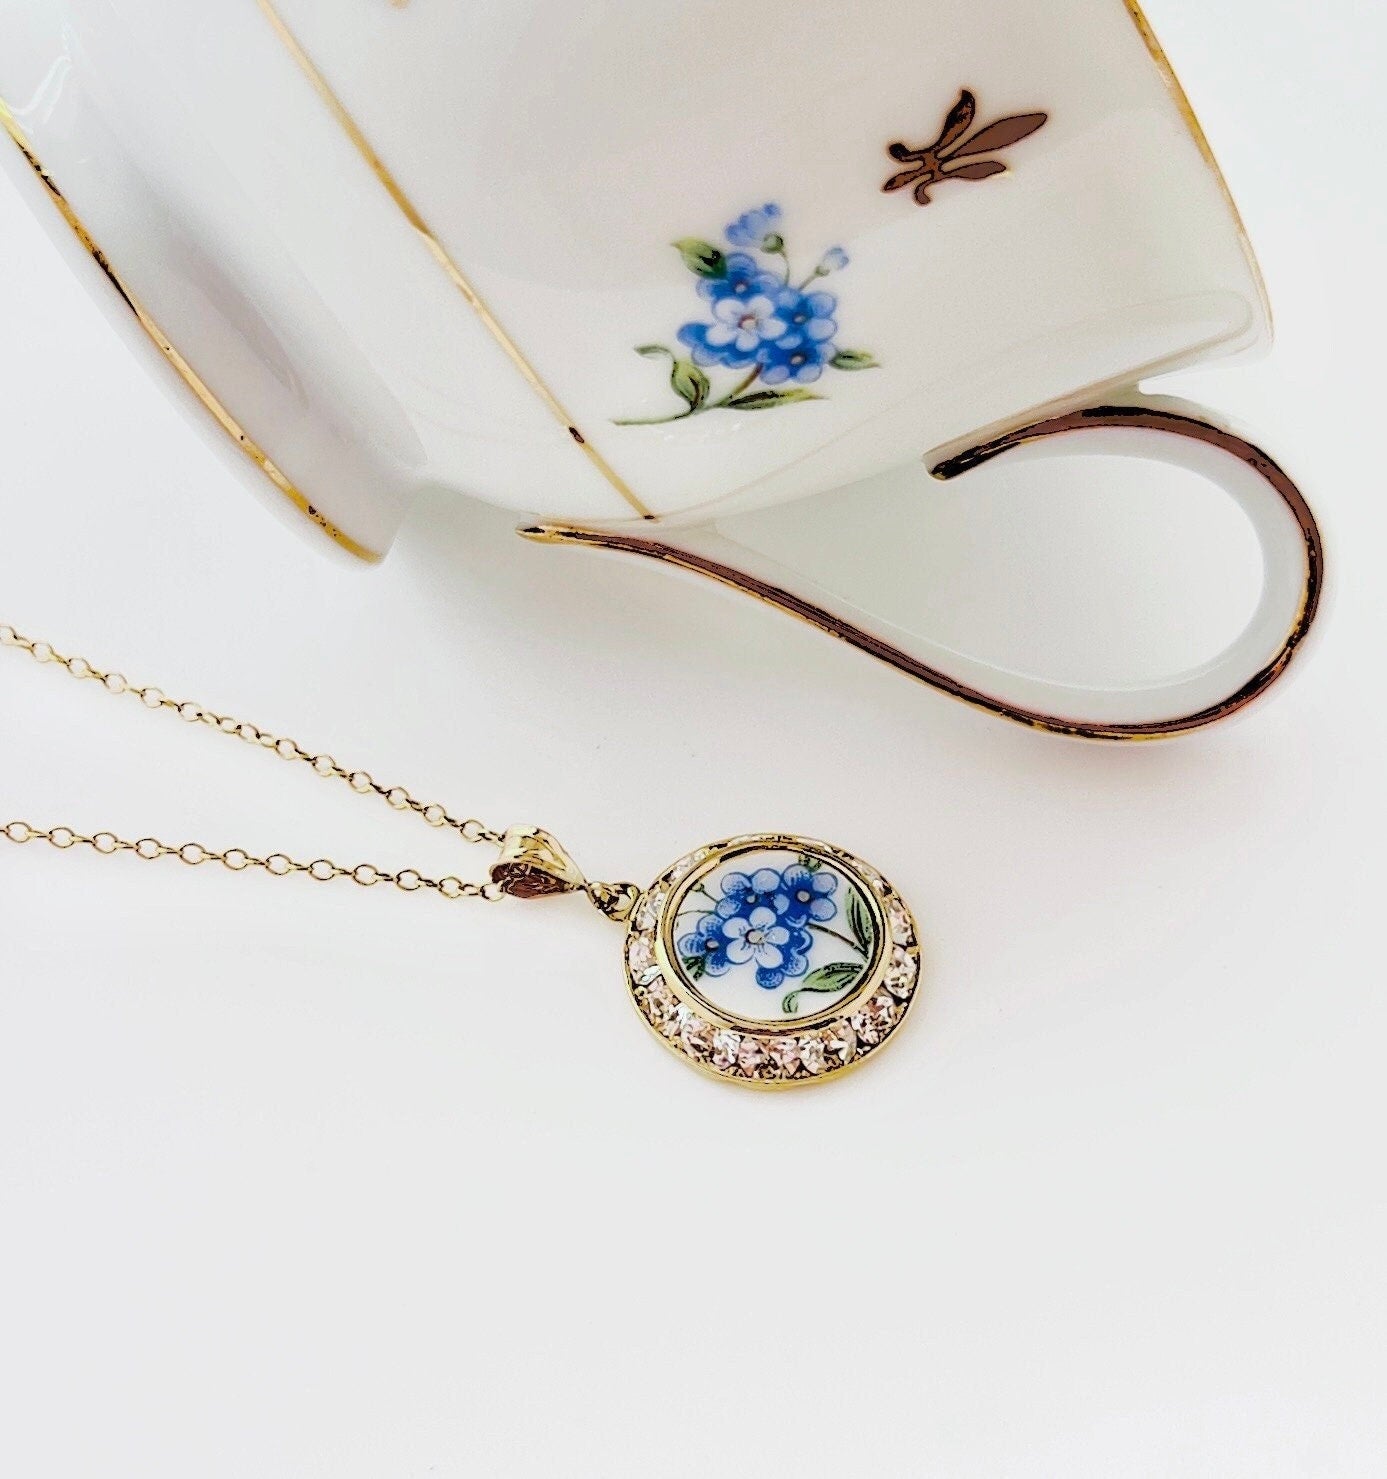 Blue Forget Me Not Necklace, Adjustable Gold Crystal Necklace, Vintage China Anniversary Gift for Girlfriend